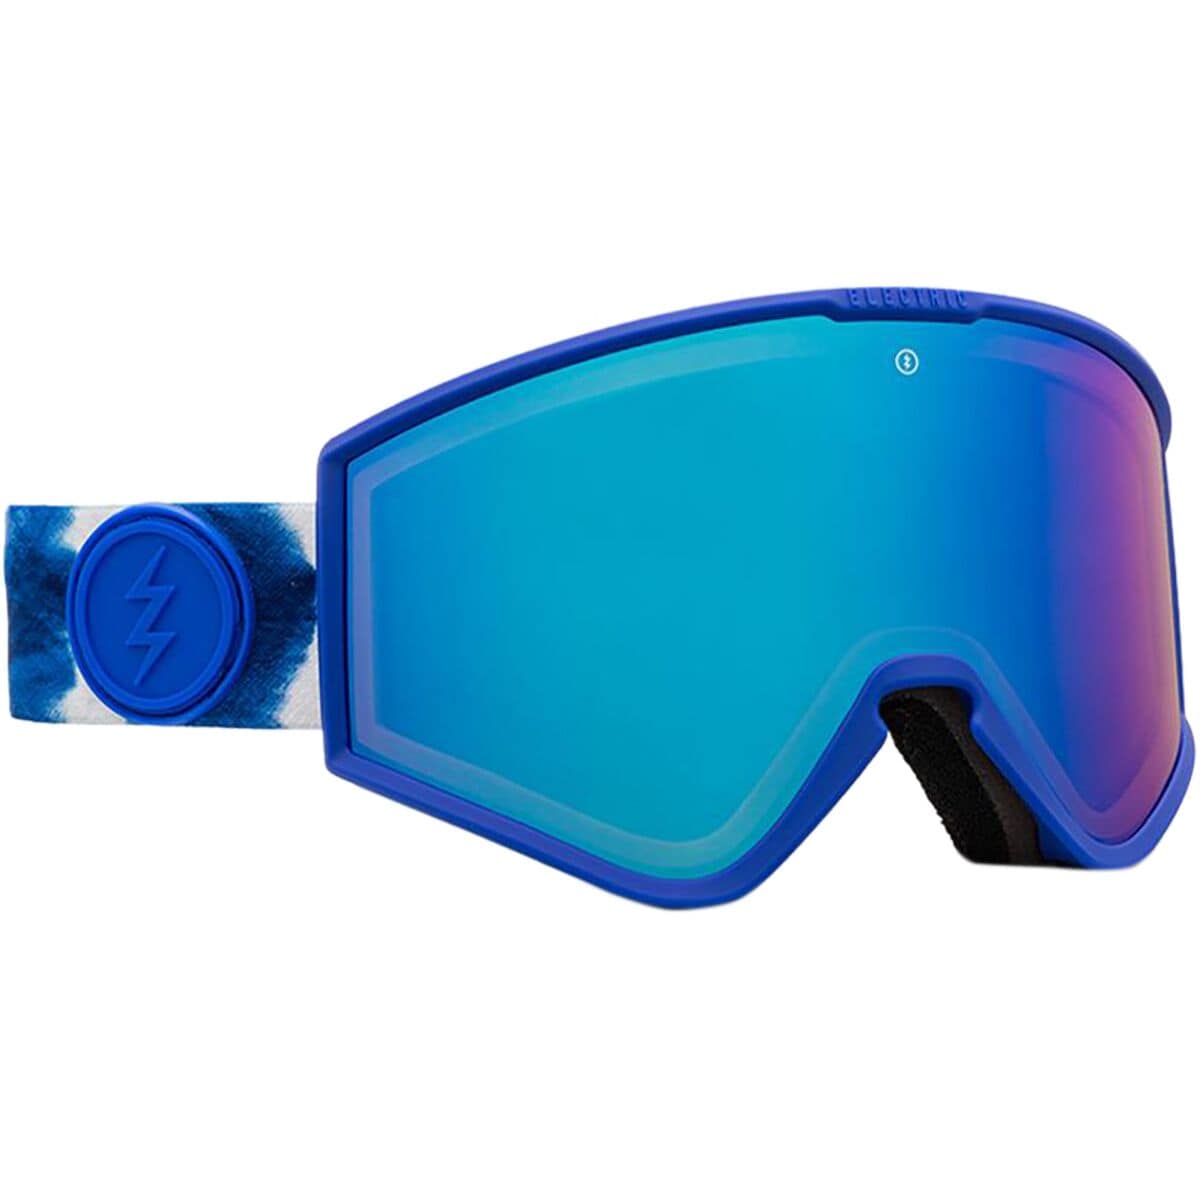 Electric Kleveland Small Goggles - Women's